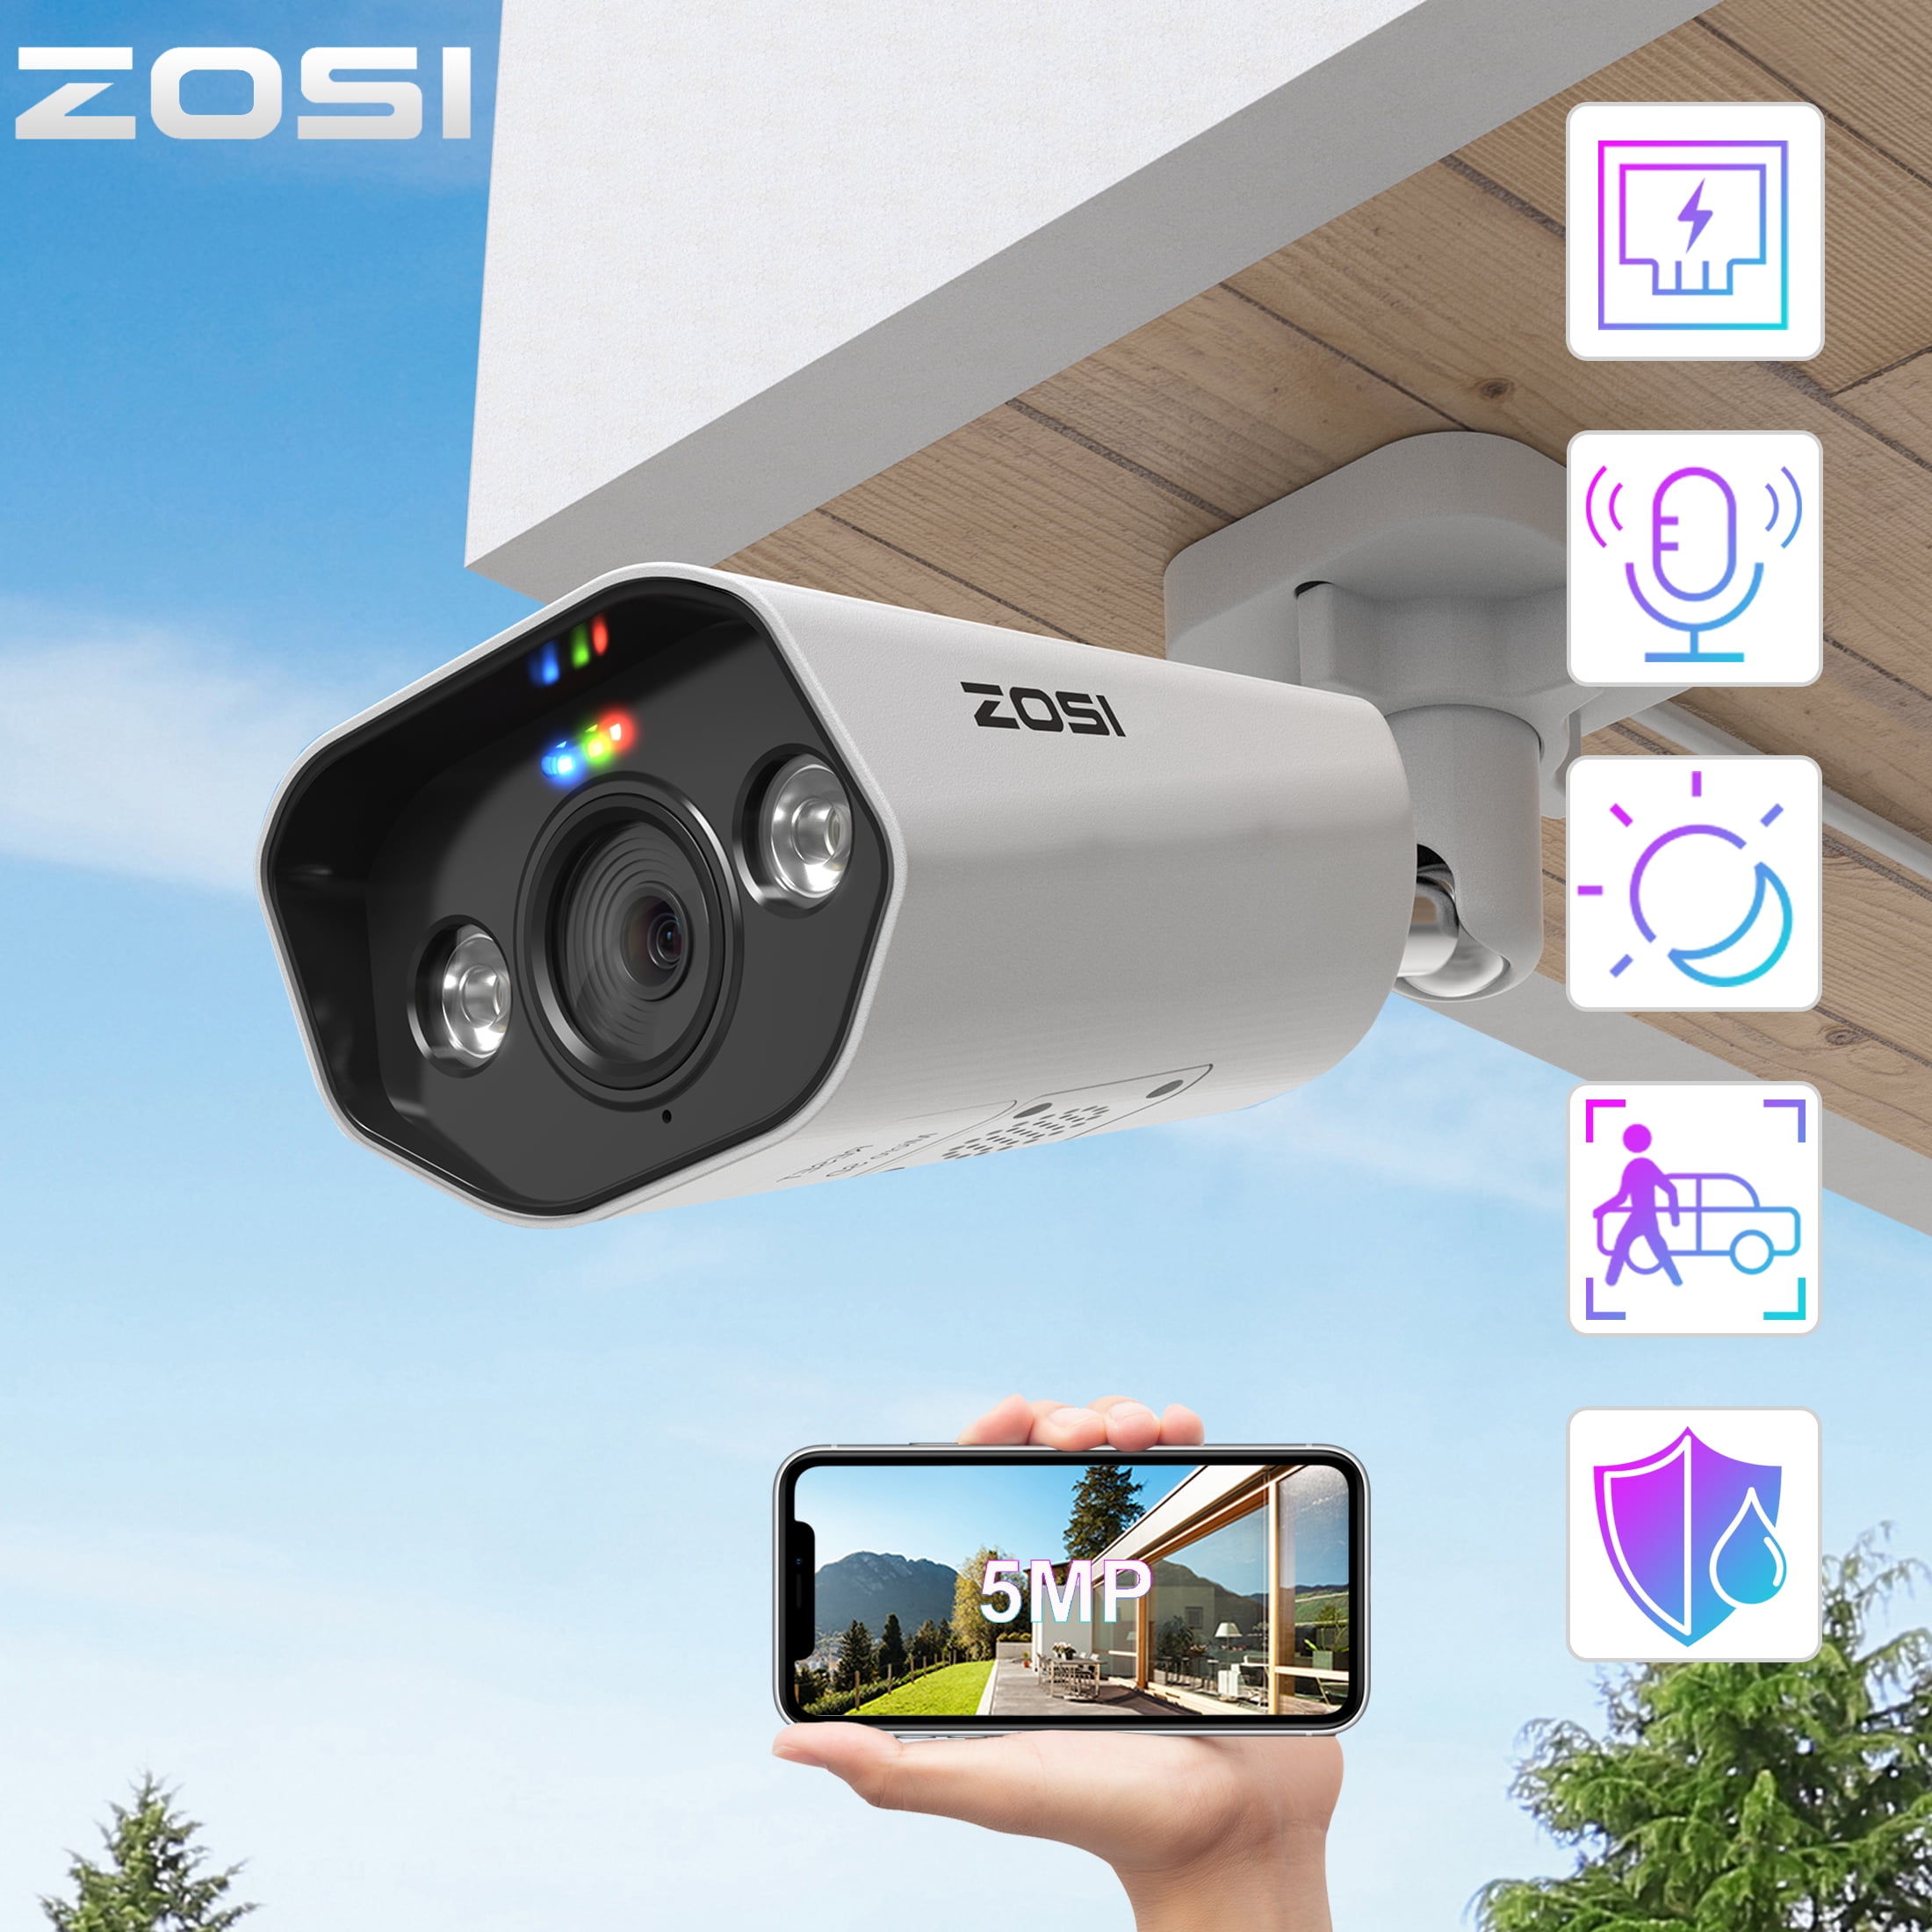 ZOSI 5MP HD Smart Outdoor Wireless Security Camera, 365 Pan/Tilt, Ai Face/Car/Sound Detect, Color Night Vision, 2-Way Audio, Black&White